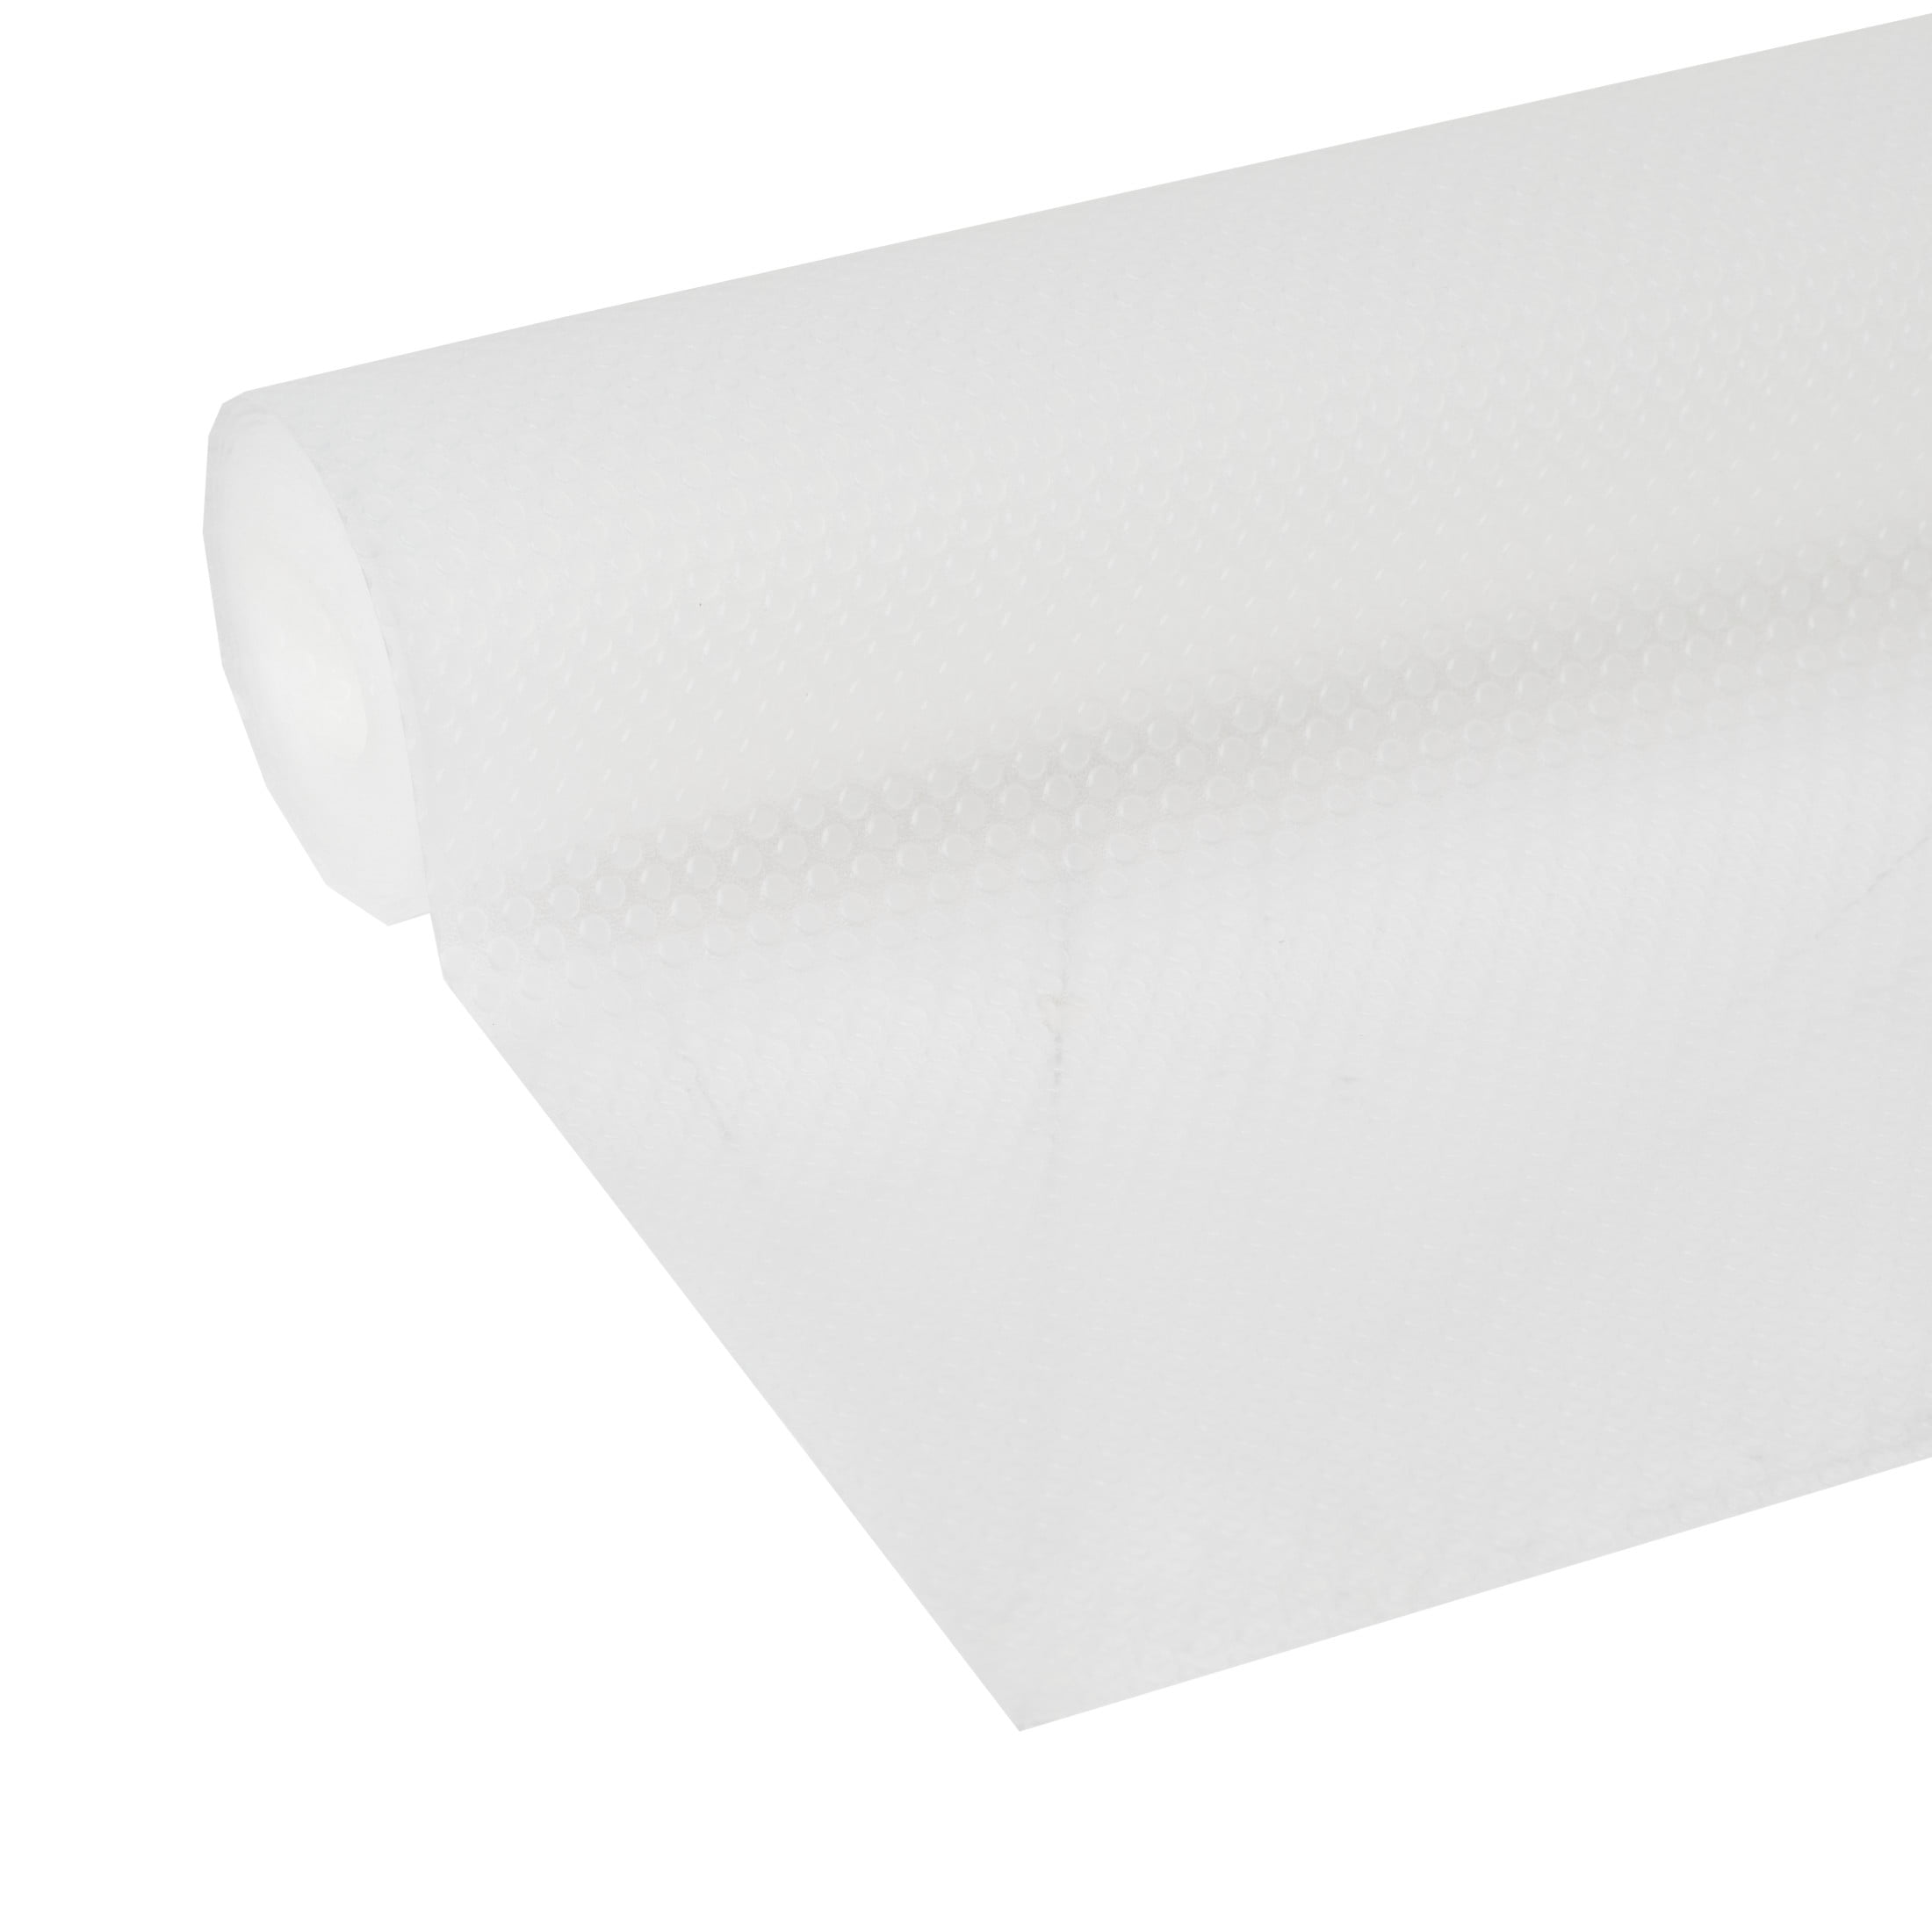 Shelf Liner, Waterproof And Stain-resistant Clear Shelf Liners